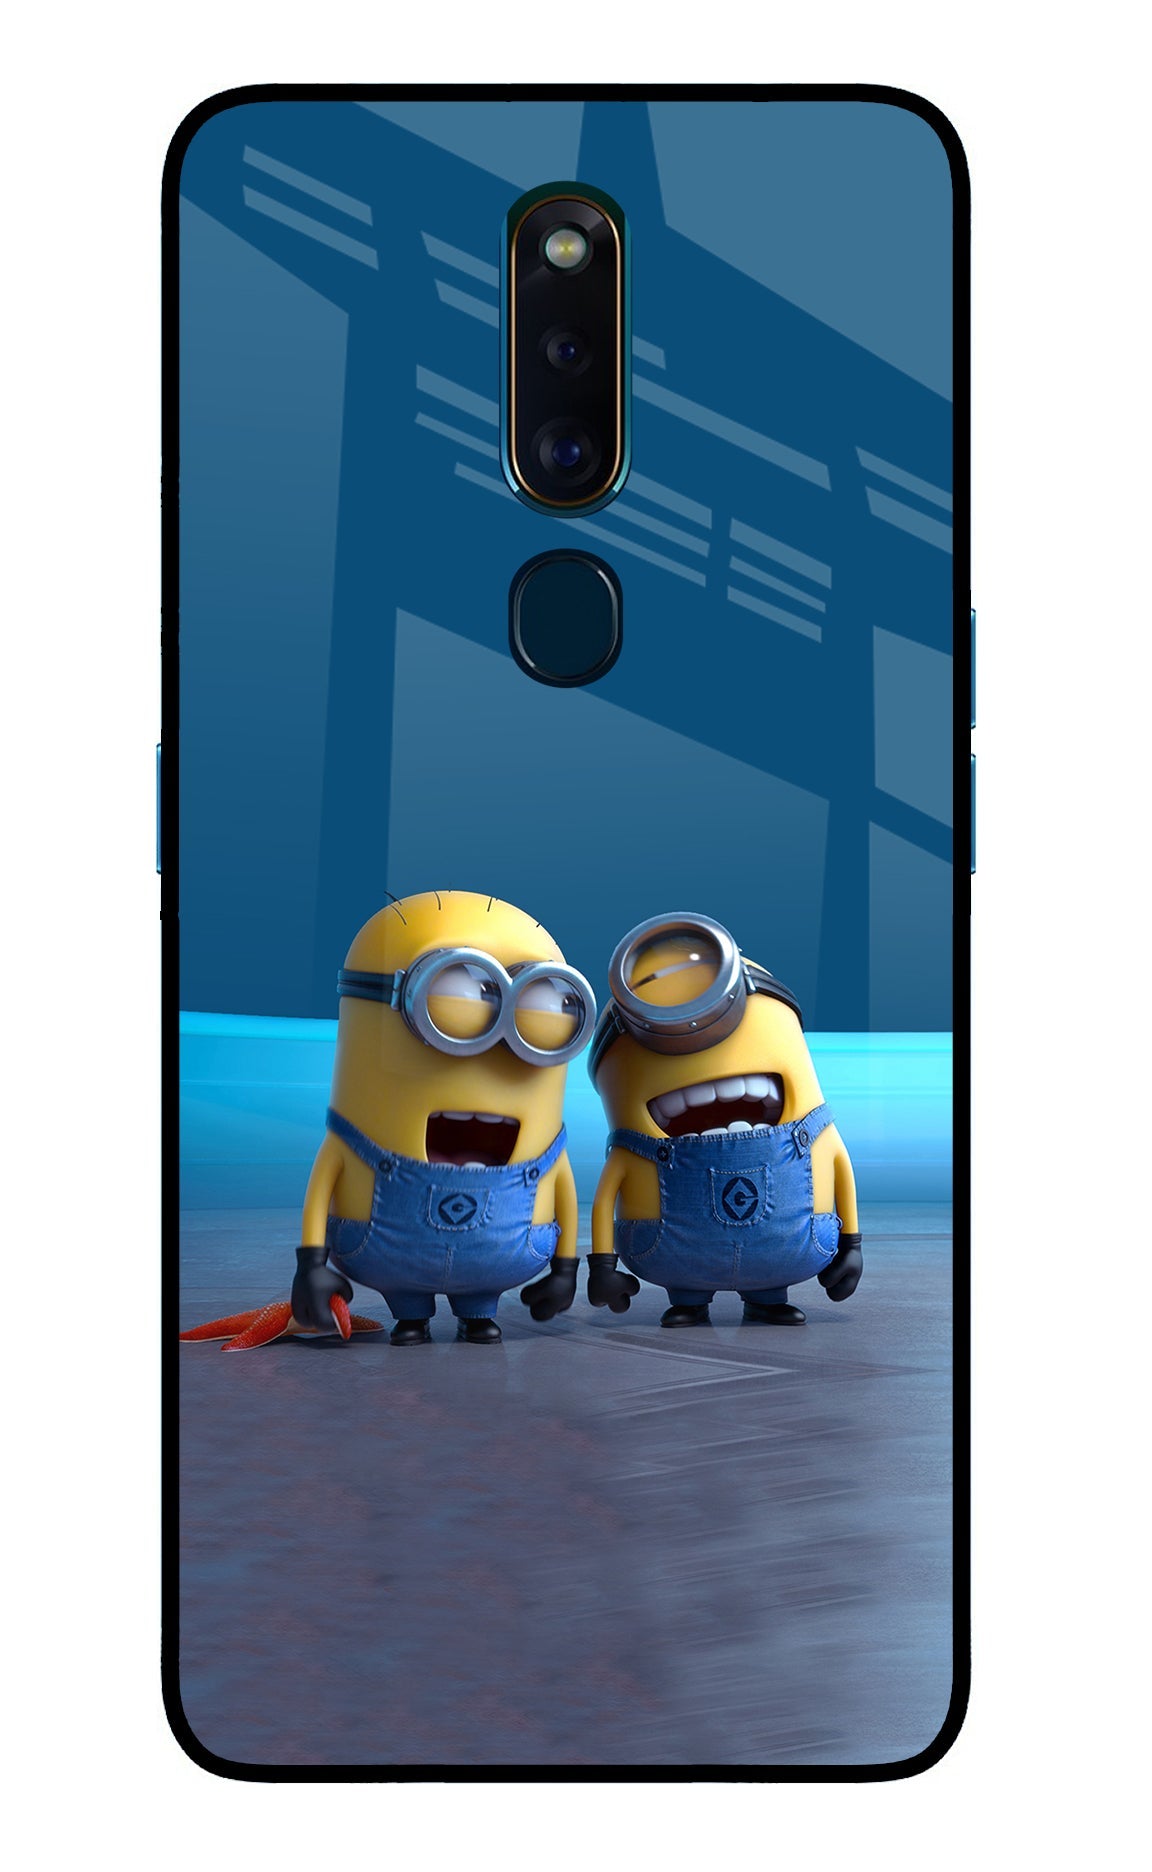 Minion Laughing Oppo F11 Pro Glass Case